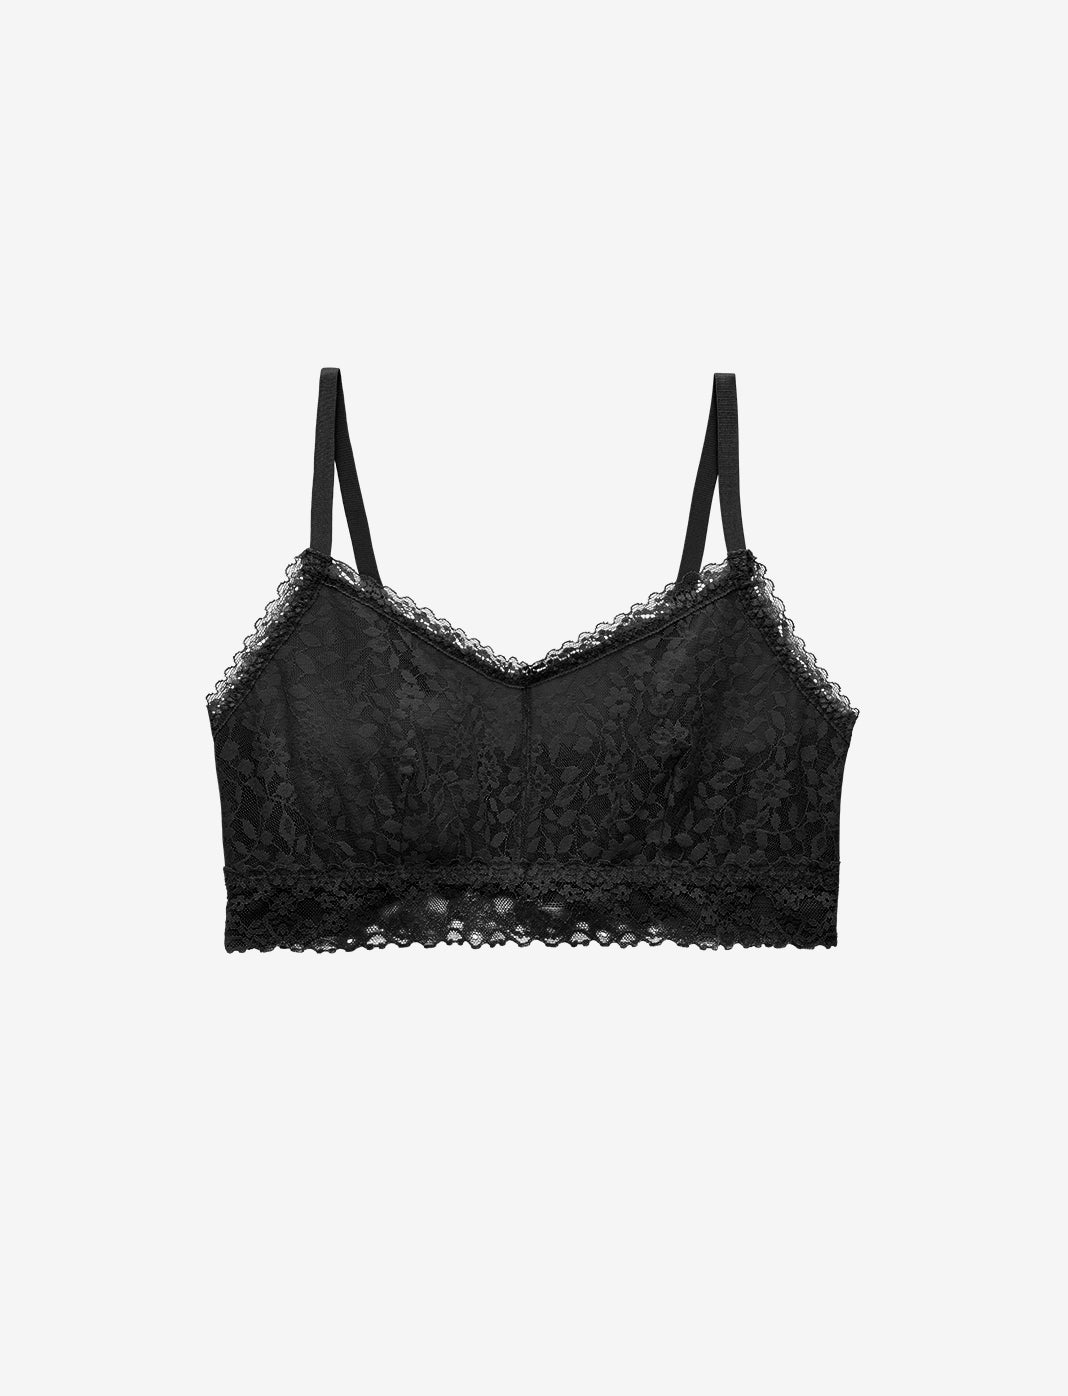 Best Unlined Bras For Style & Support - Unlined Underwire & Plunge Bras ...